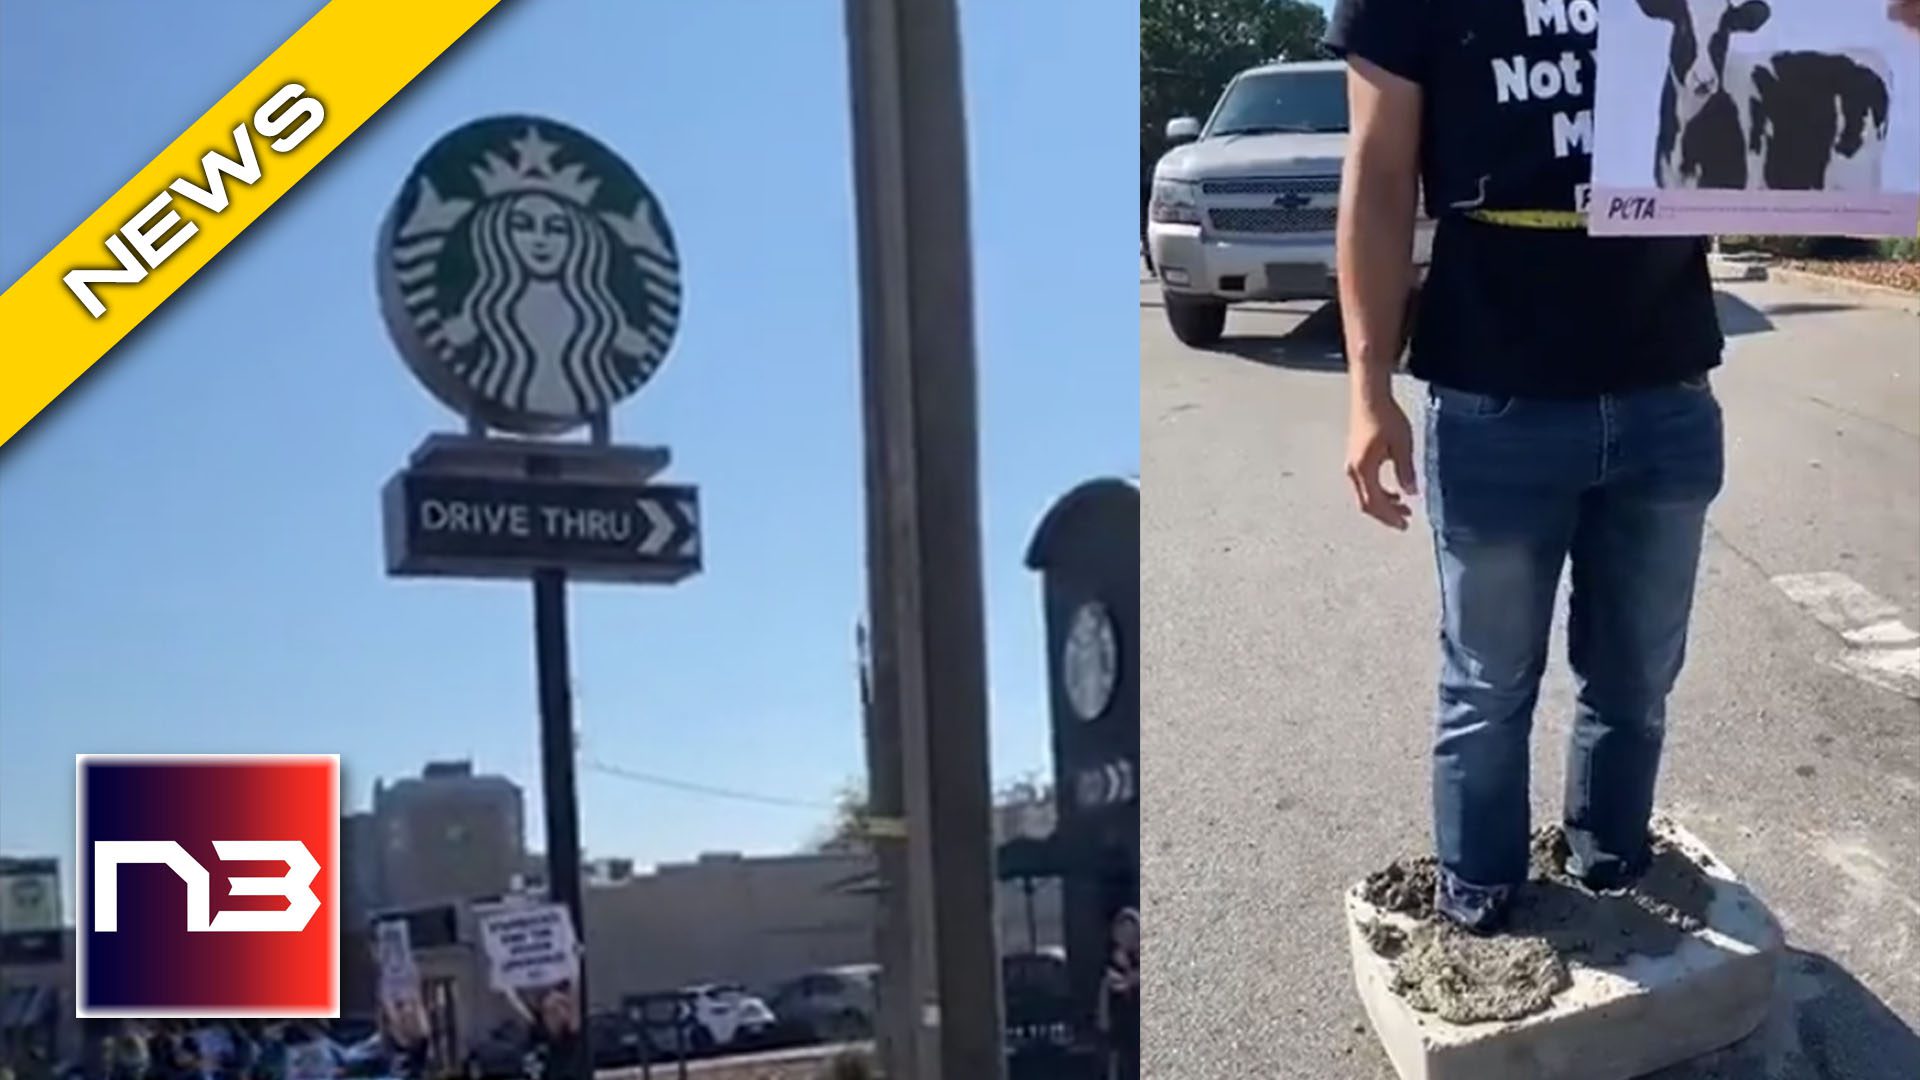 PETA Activists Cement Themselves to Starbucks Driveway, Then the Police Showed Up